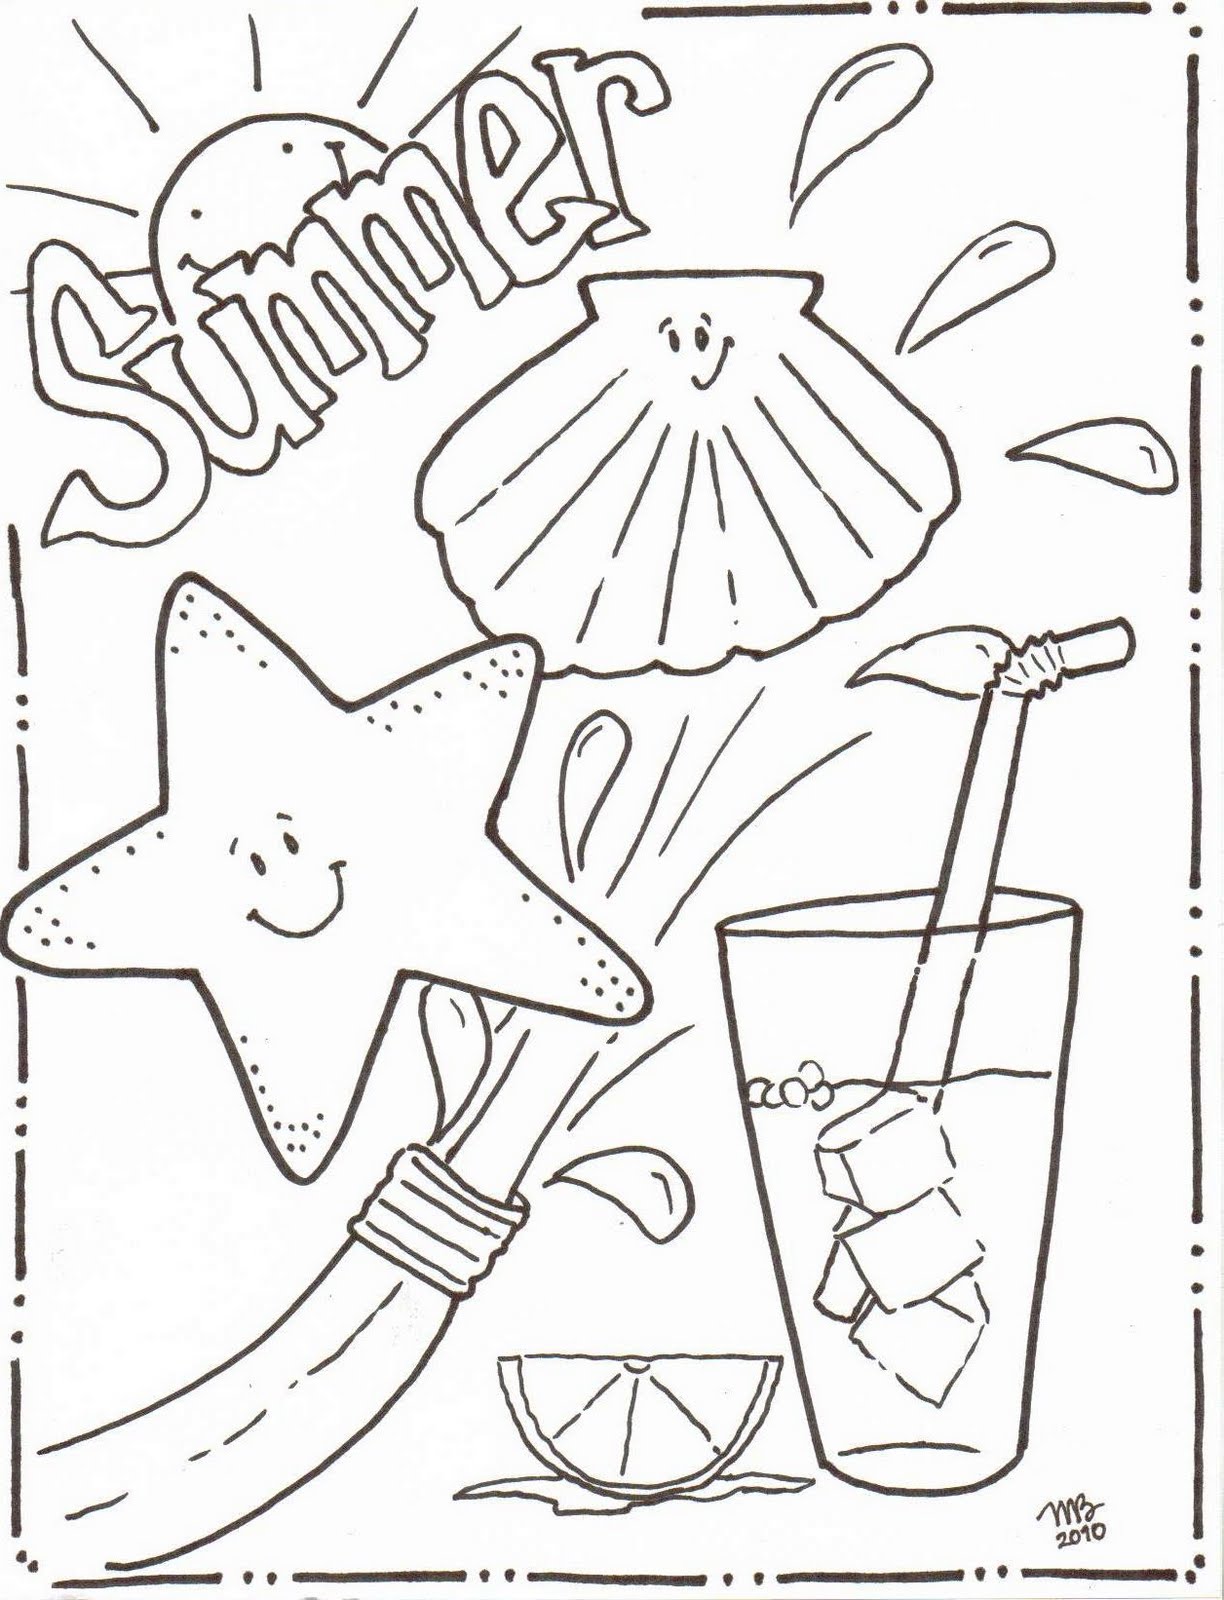  Summer Coloring Sheets For Kids 3